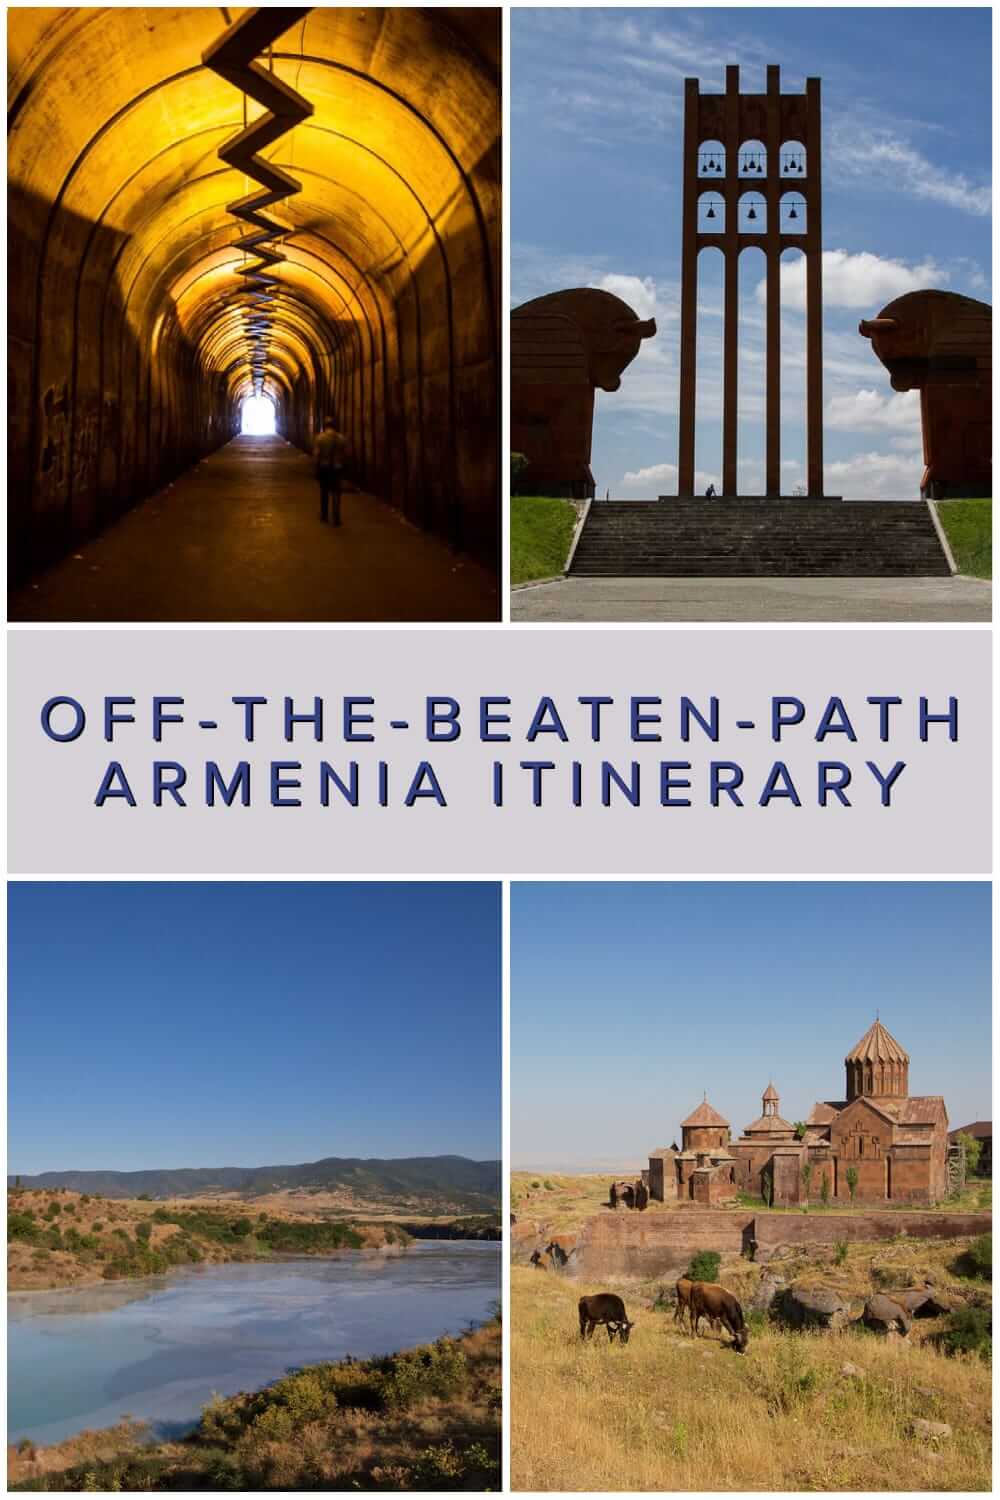 Armenia Itinerary – What to see in Armenia in 2 weeks #offthepath #travel #backpacking #Caucasus #travelplanning